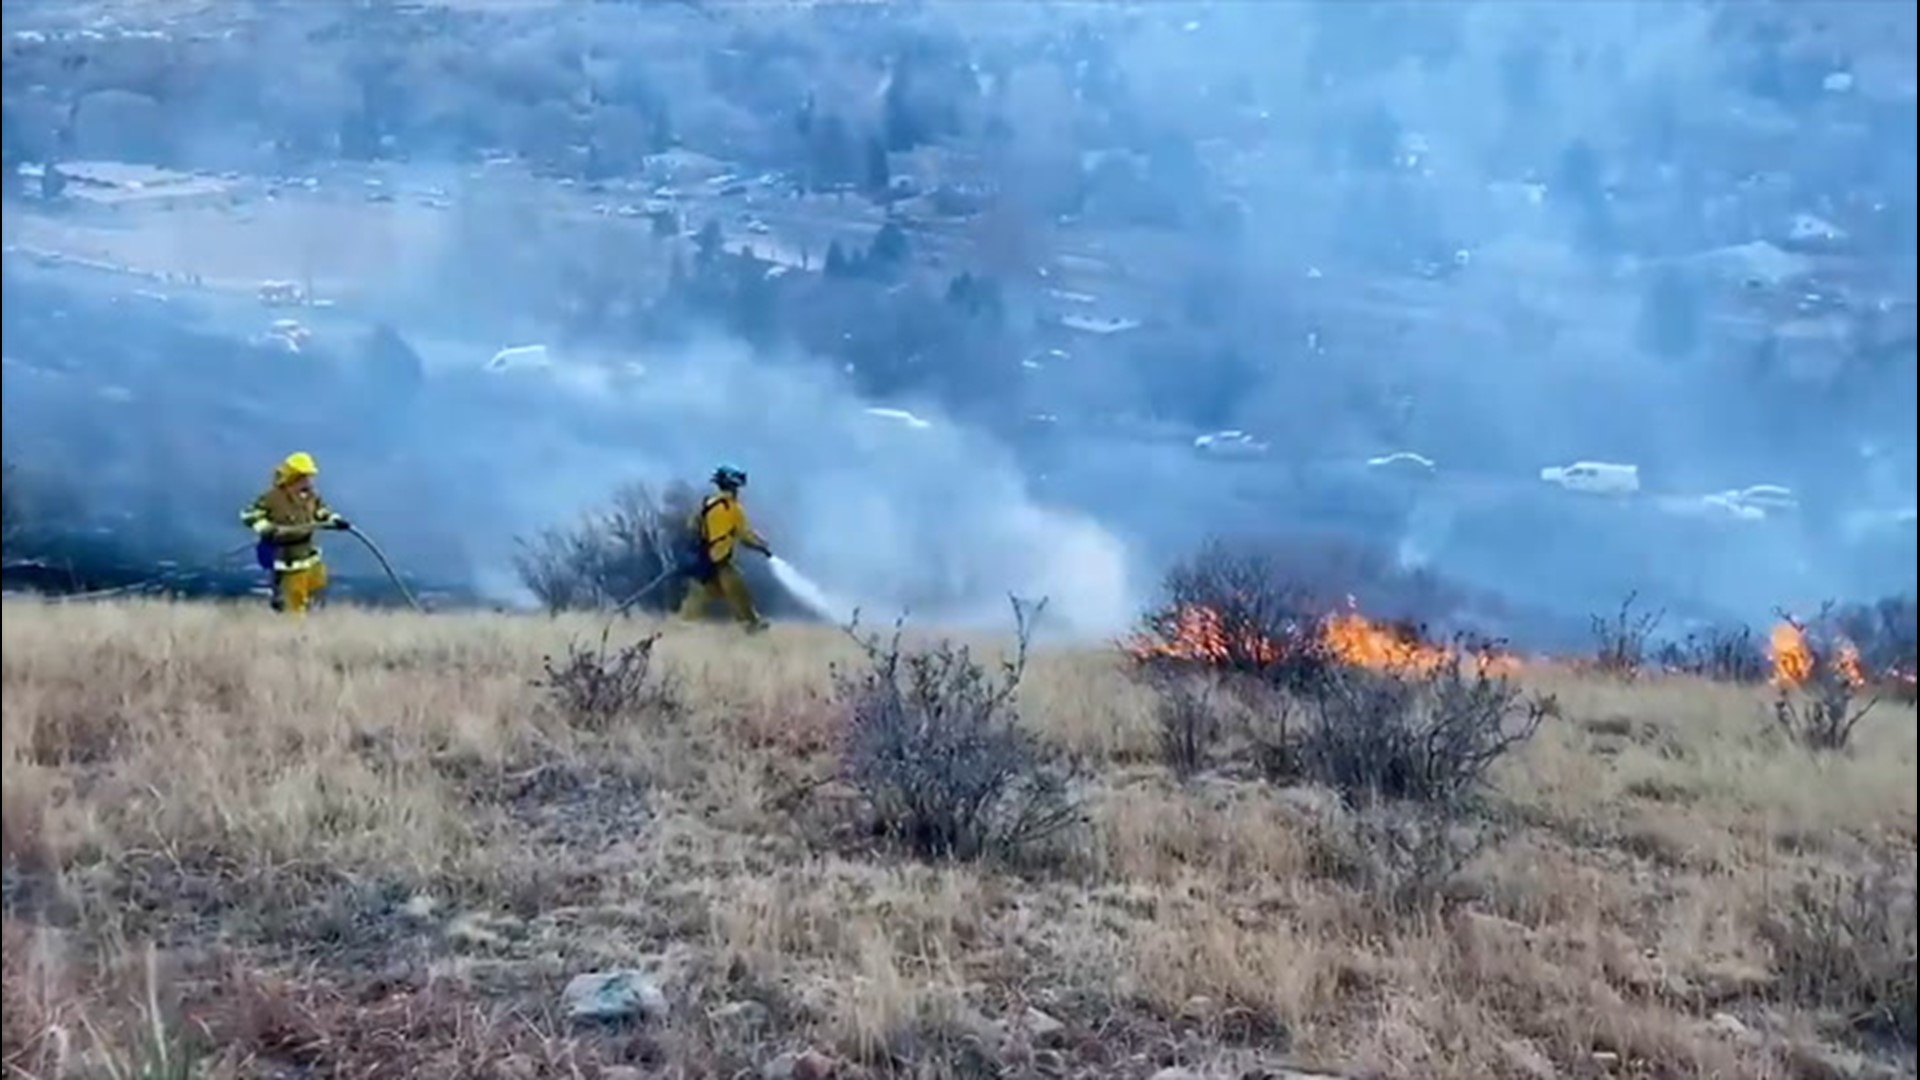 Dozens of firefighters responded to a grassfire that burned around five acres in Colorado Springs on Jan. 20 after someone improperly disposed of a cigarette.